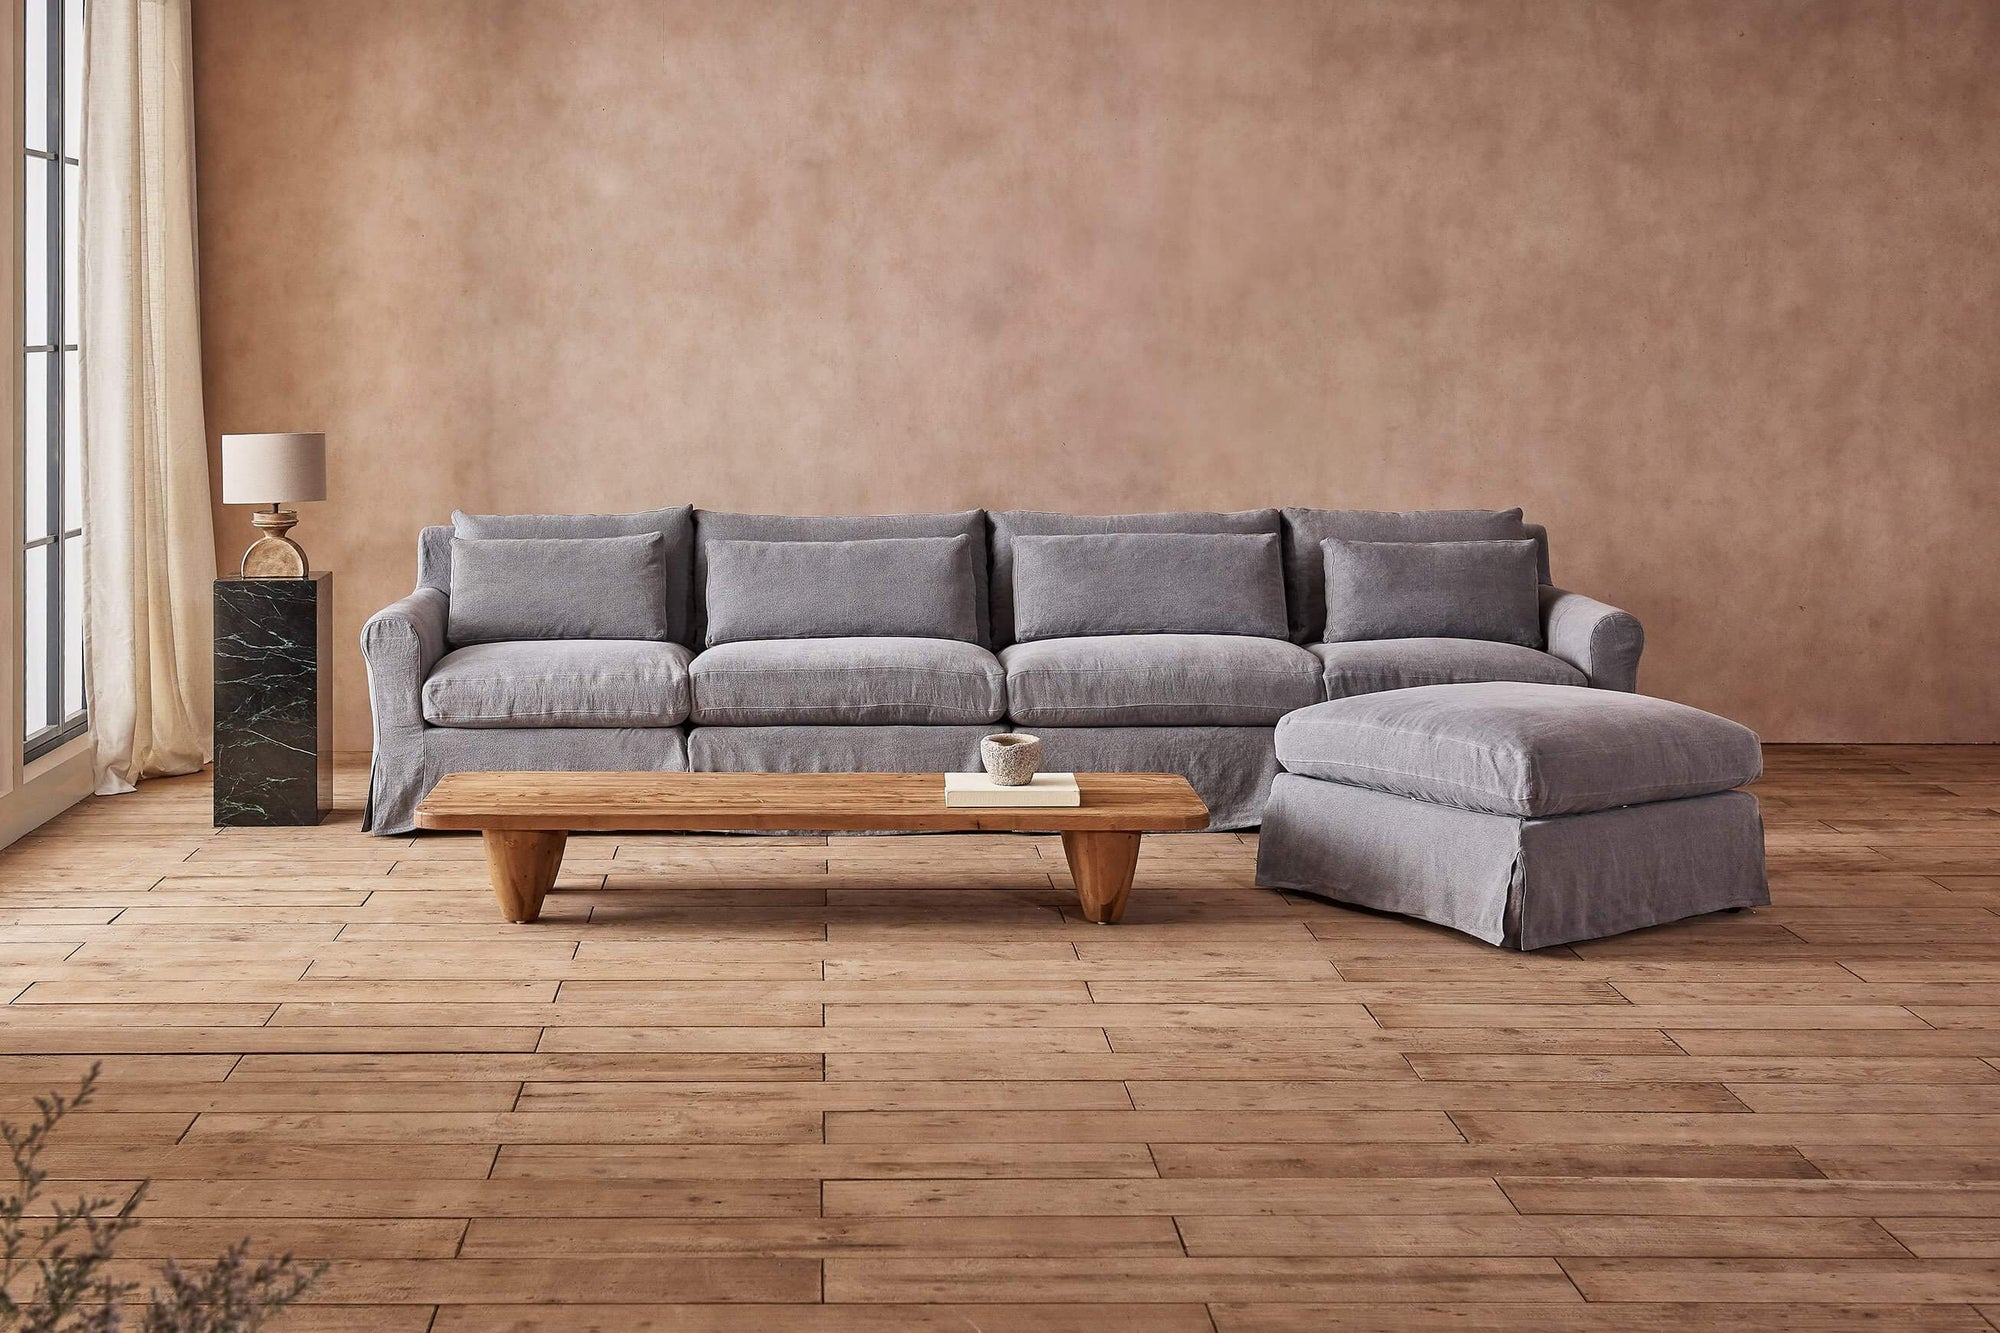 Elias 5-piece Chaise Sectional Sofa in Ink Cap, a medium cool grey Light Weight Linen, placed in a room with the Theo Coffee Table